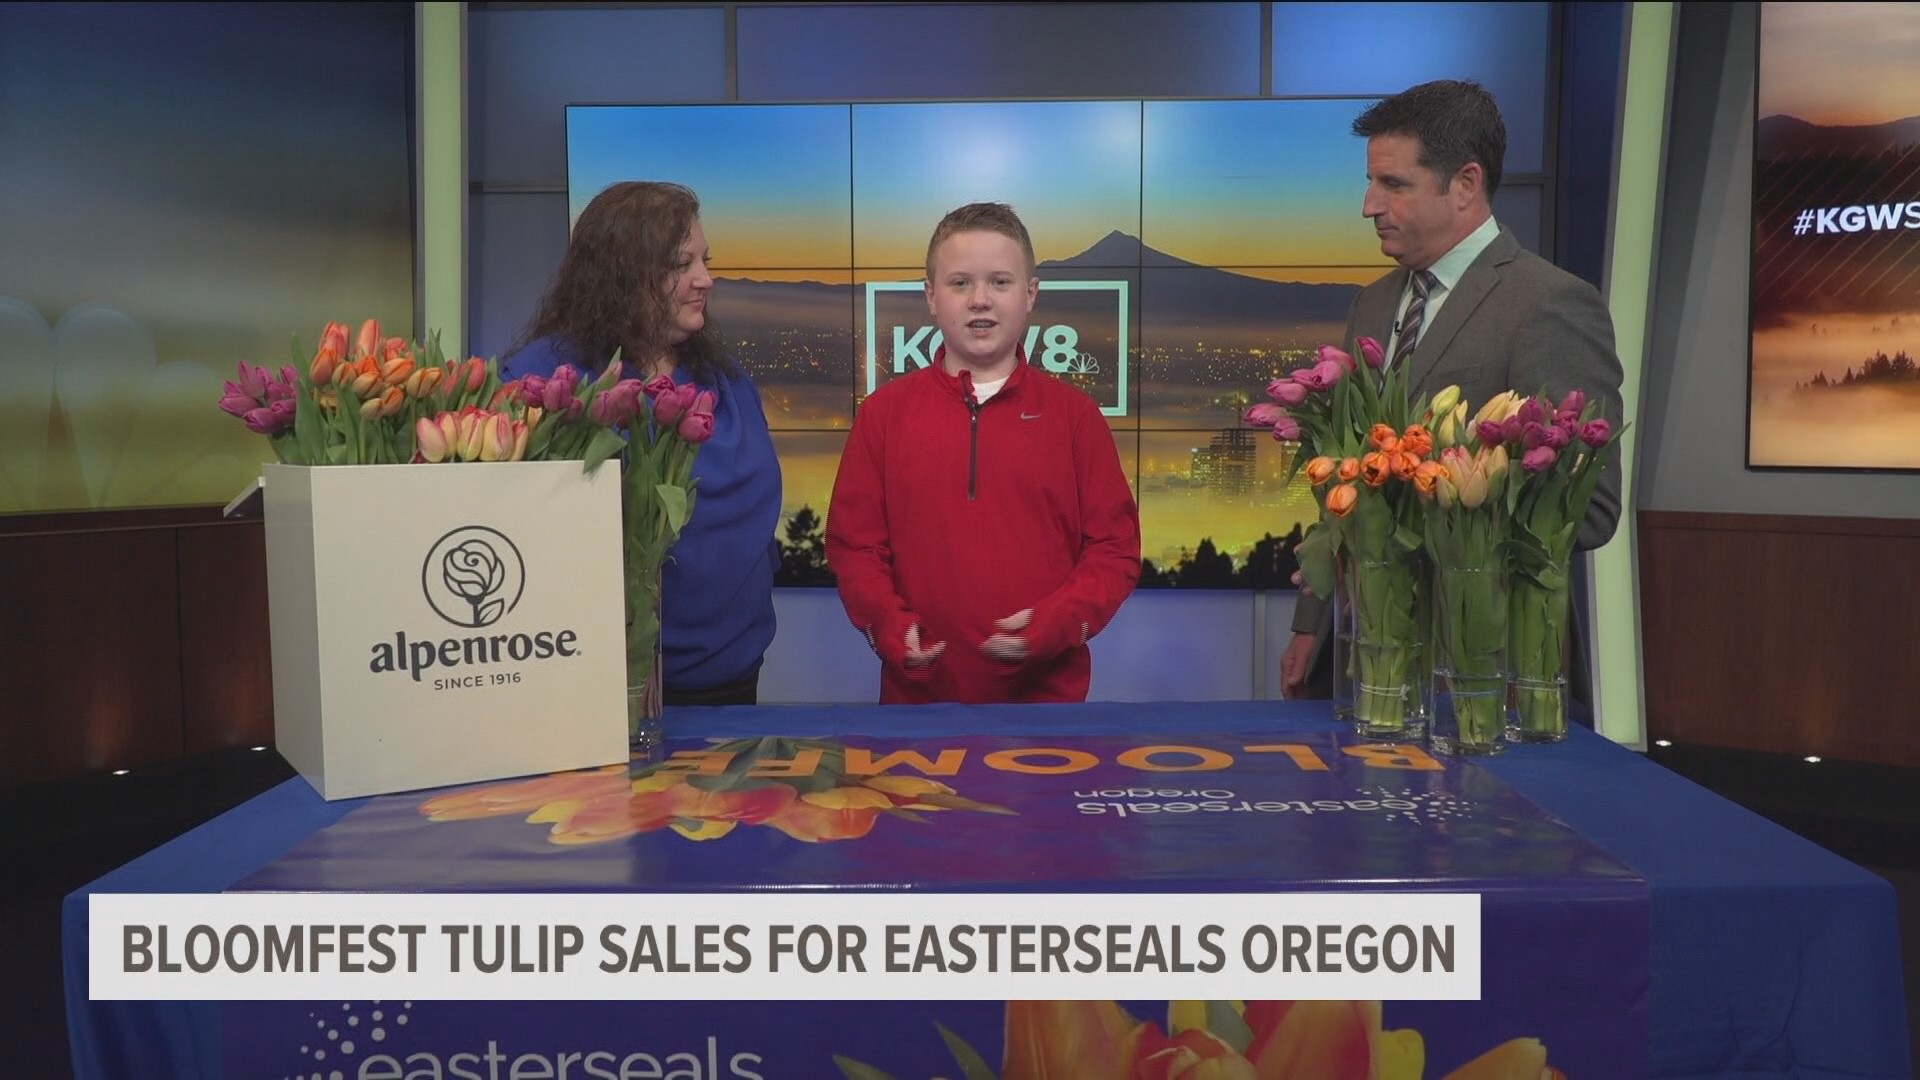 Tulips on sale to support Easterseals Oregon programs that enrich the lives of disabled children and adults, as well as veterans and other vulnerable communities.